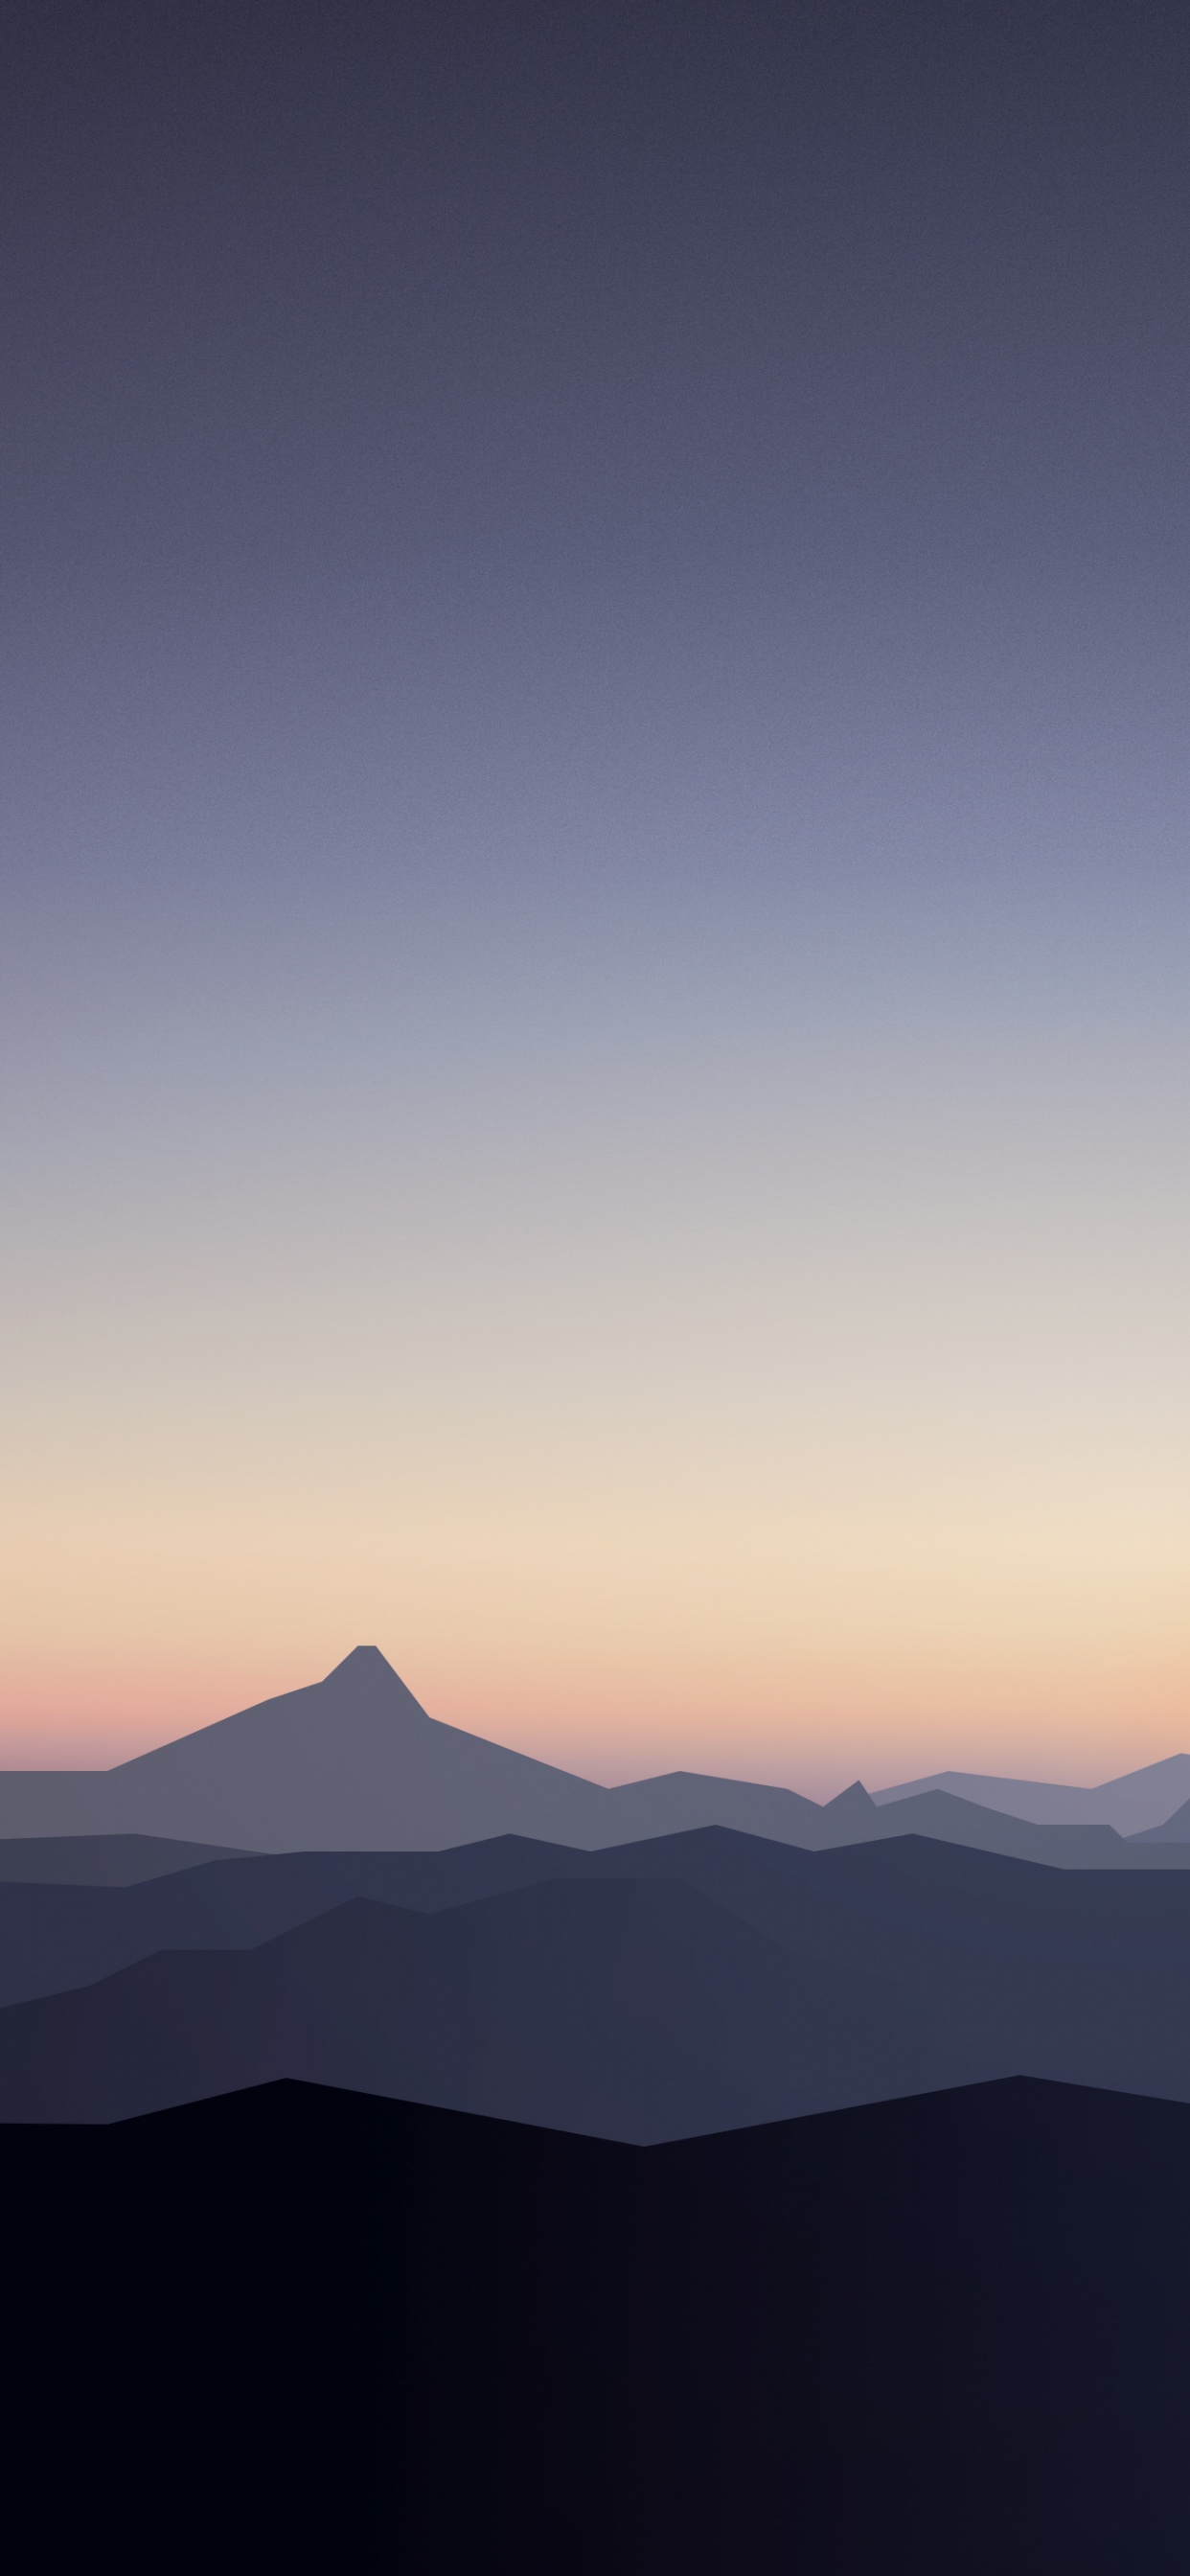 Silhouette of Mountains During Sunset. Wallpaper in 1242x2688 Resolution